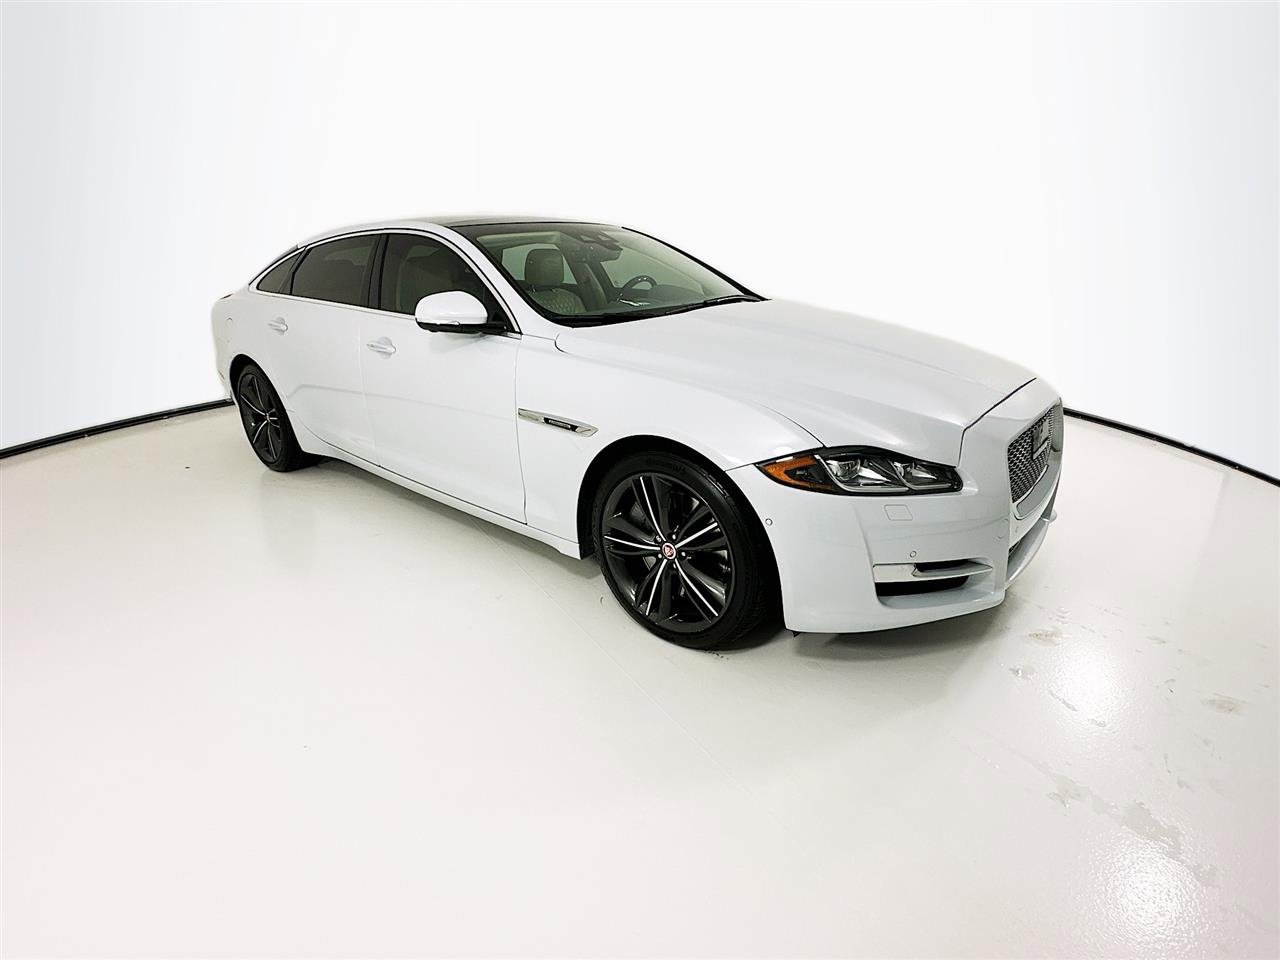 Used Jaguar XJ for Sale Right Now - Autotrader